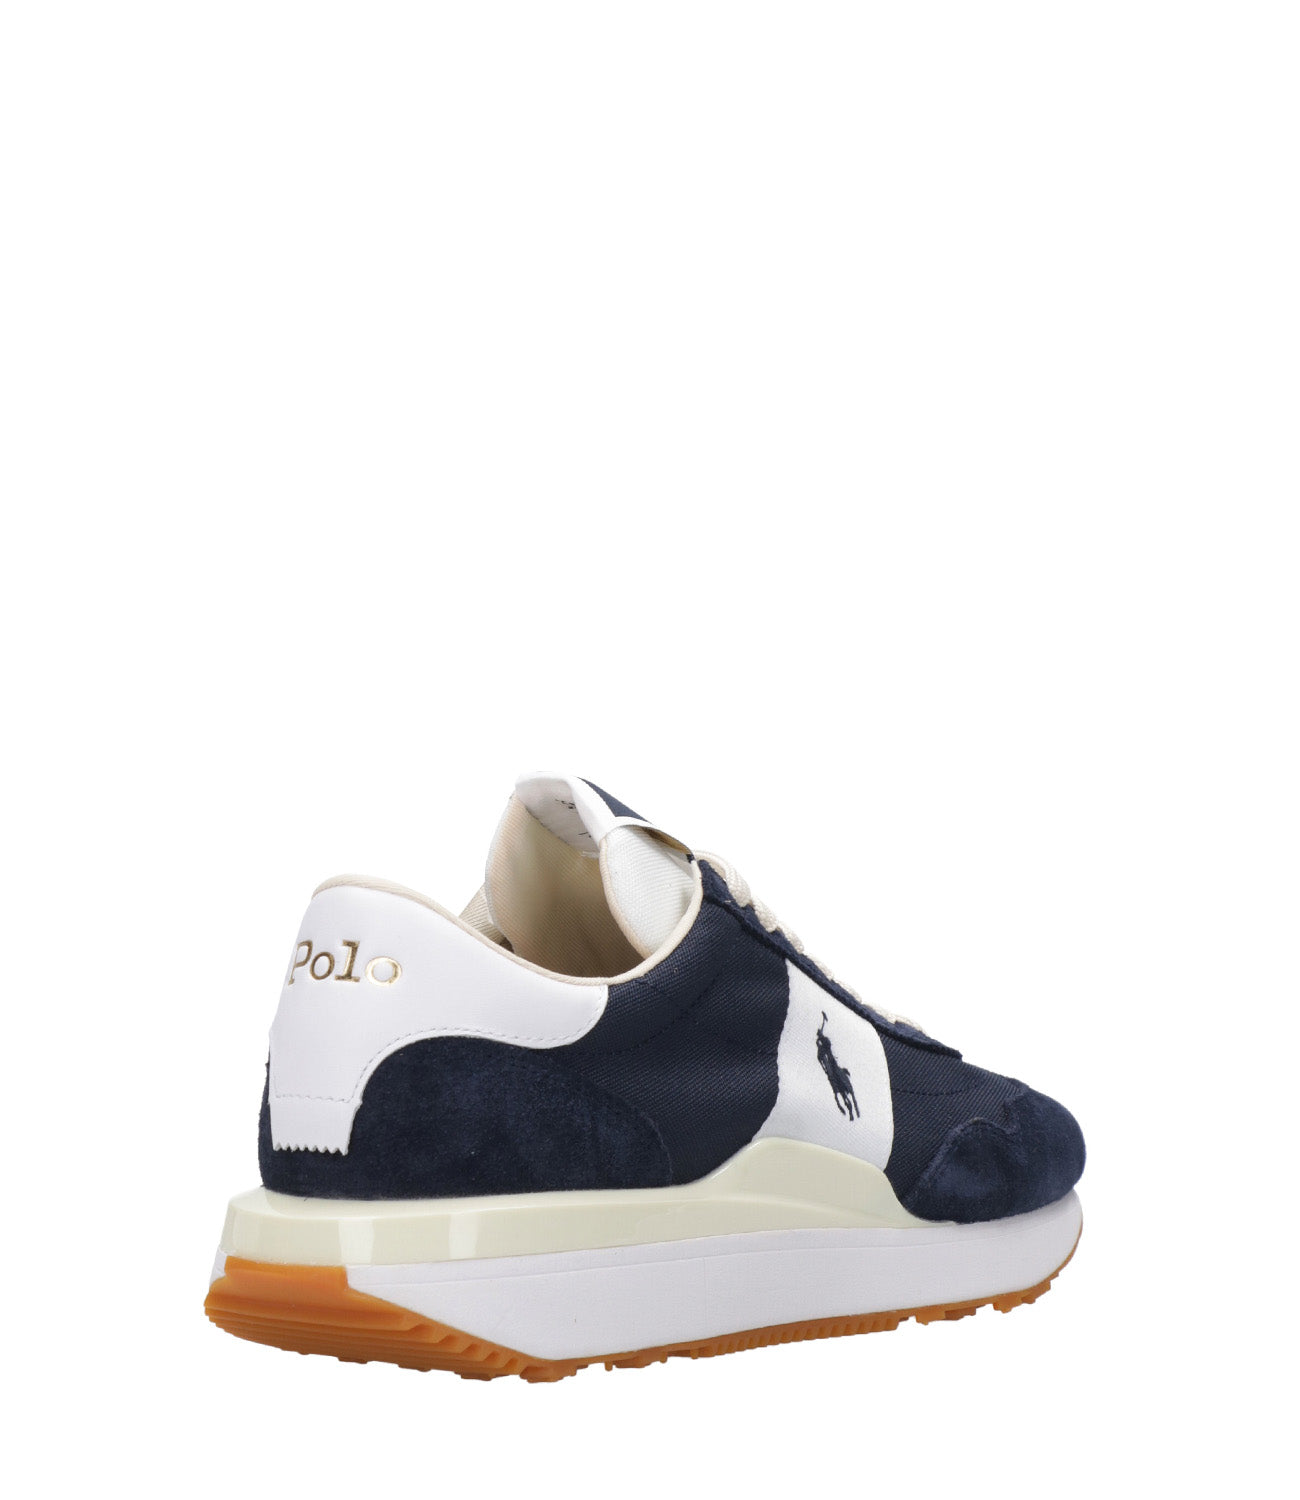 Polo Ralph Lauren | Train 89 Sneakers Navy Blue and White